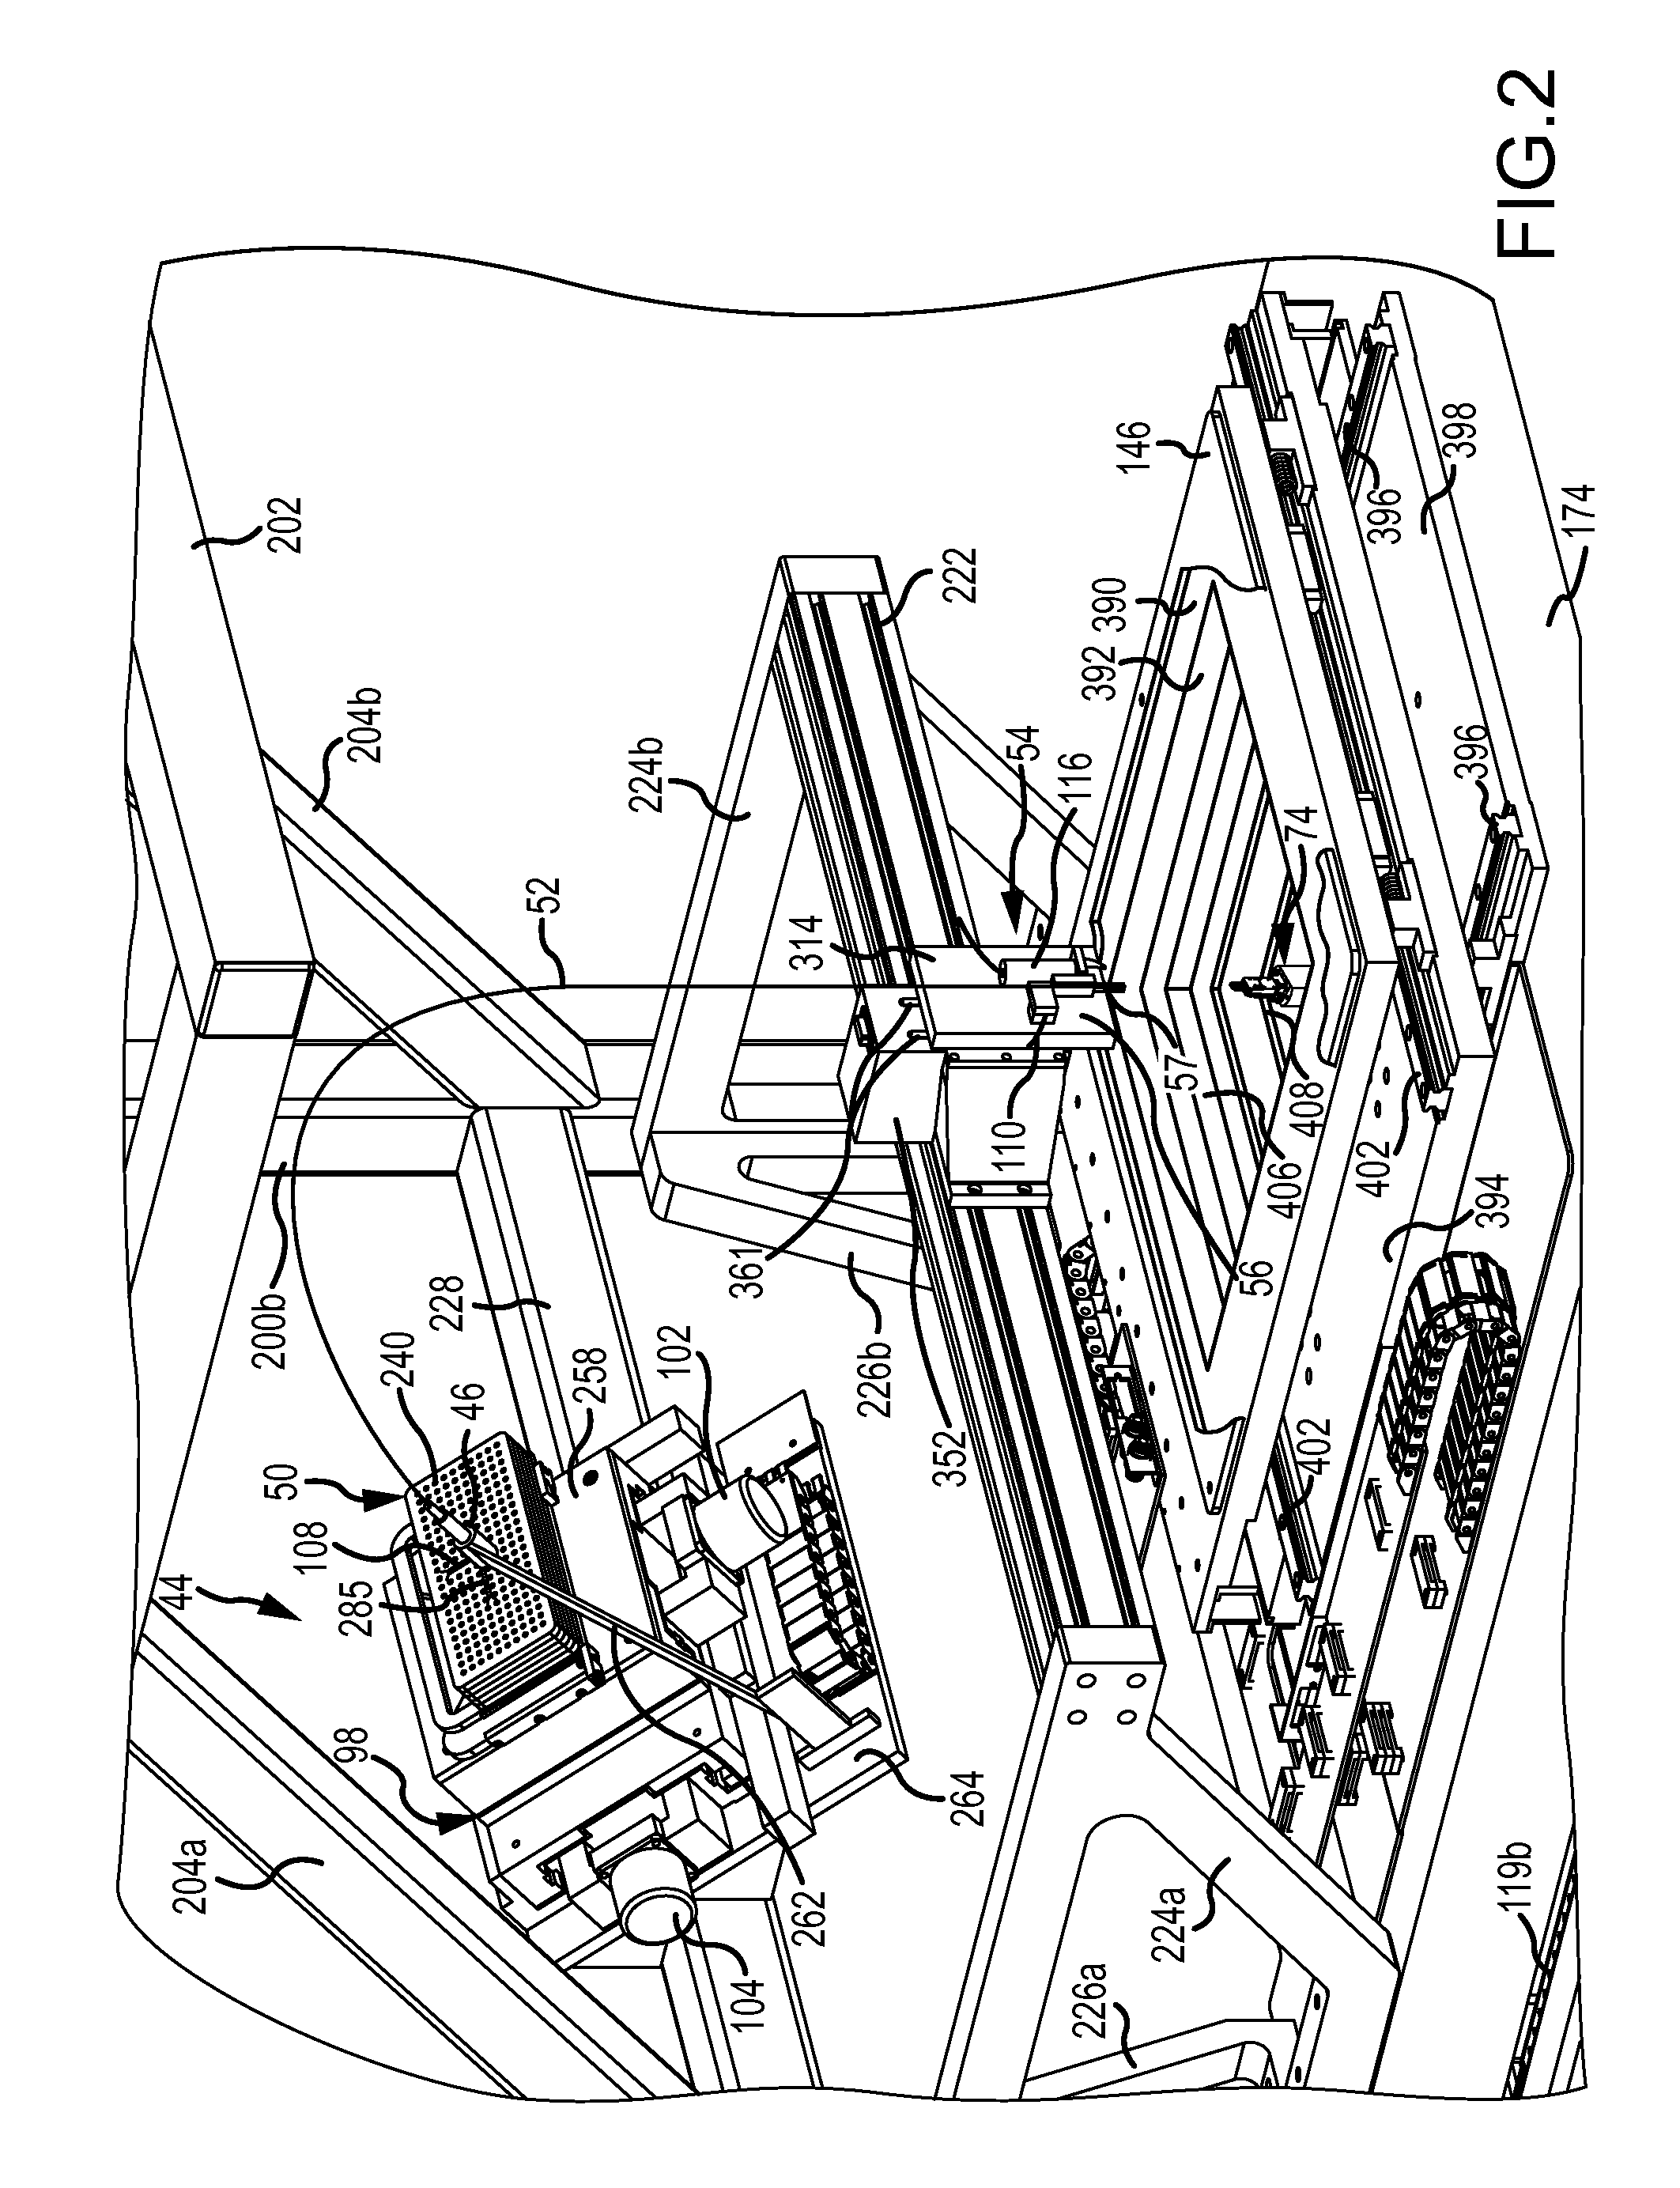 Automated twist pin assembling machine for interconnecting stacked circuit boards in a module